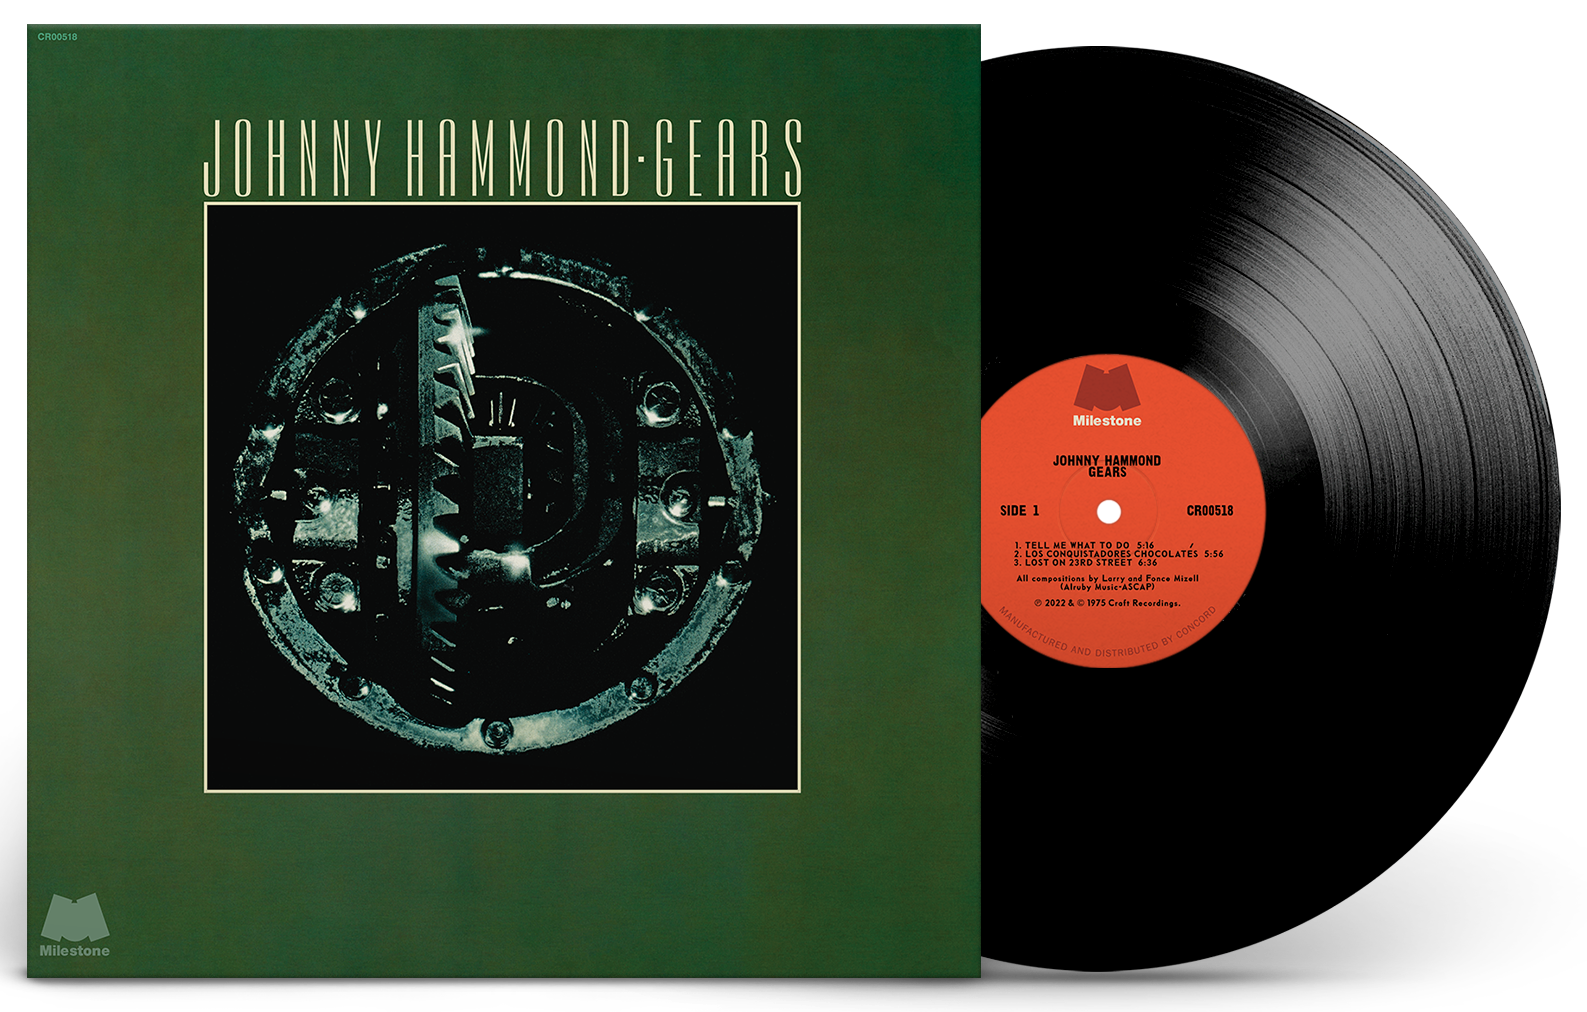 Featured image for “JOHNNY HAMMOND’S FUSION MASTERPIECE GEARS RETURNS TO VINYL”